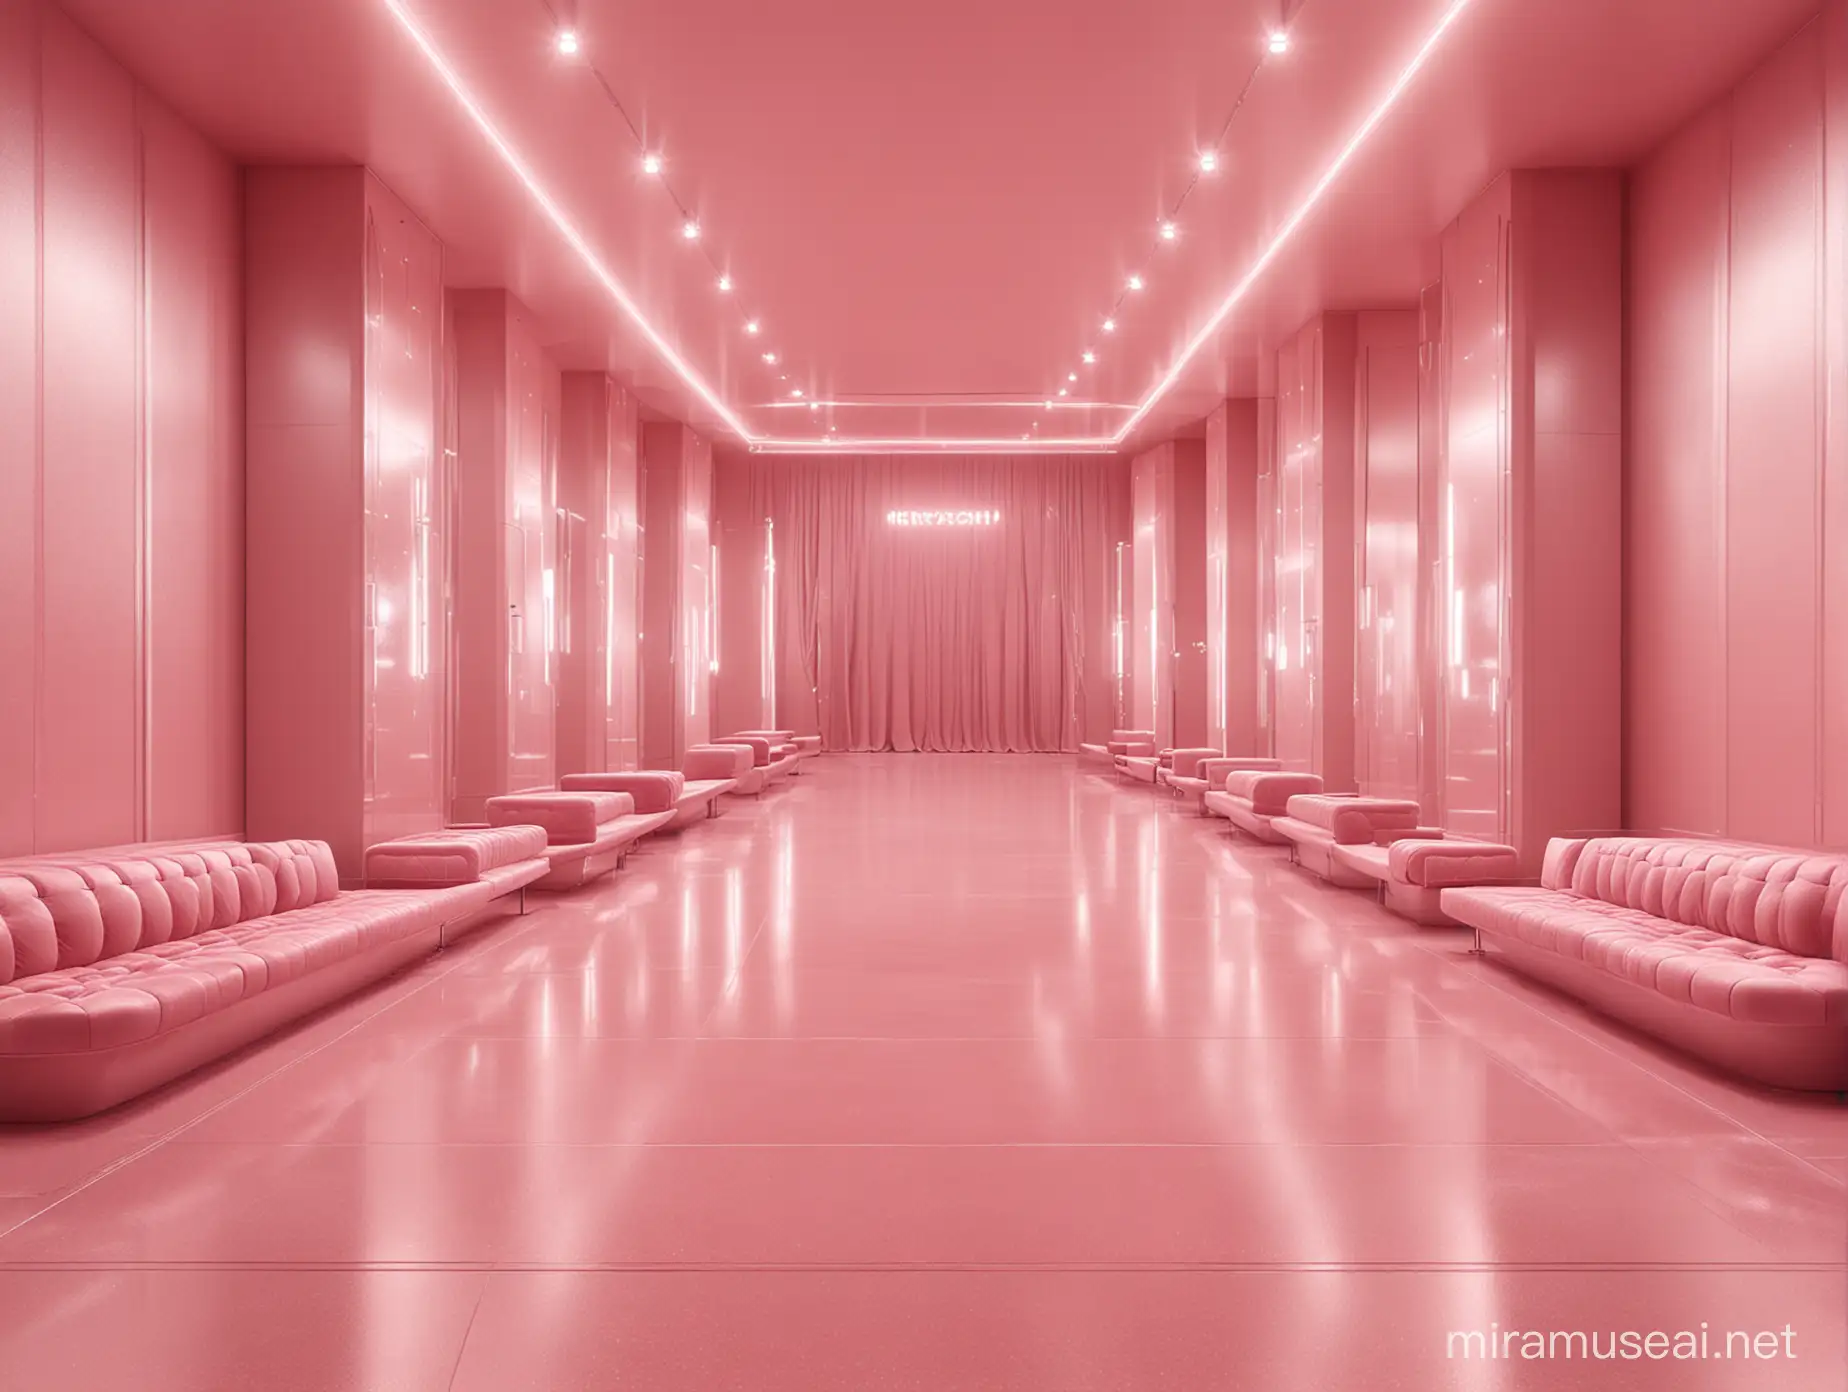 long luxury runway interior. elegant catwalk stage surrounded by seats. iridescent pink. smooth surface floors. diamond finish. backstage entrance is visible in the background. archviz. lights. 1-point perspective. frontal perspective.